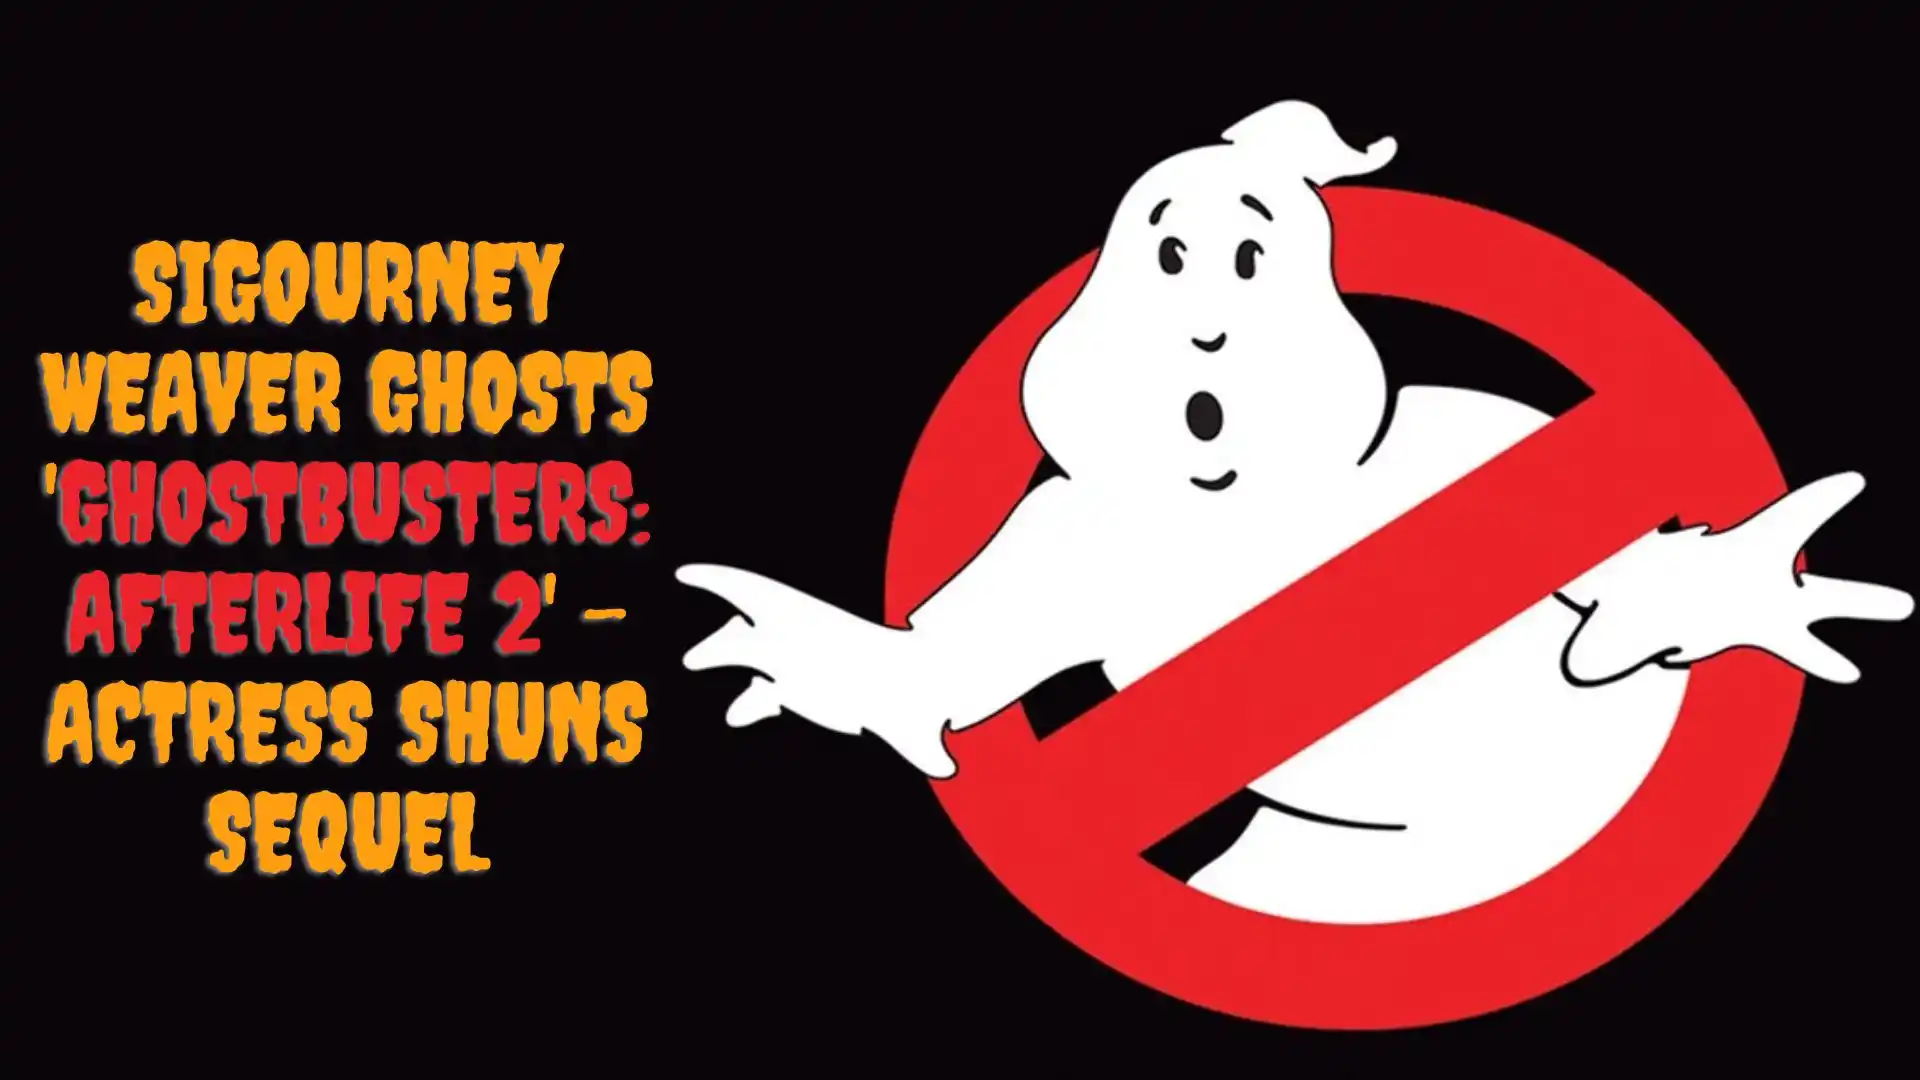 Sigourney Weaver Ghosts 'Ghostbusters_ Afterlife 2' – Actress Shuns Sequel